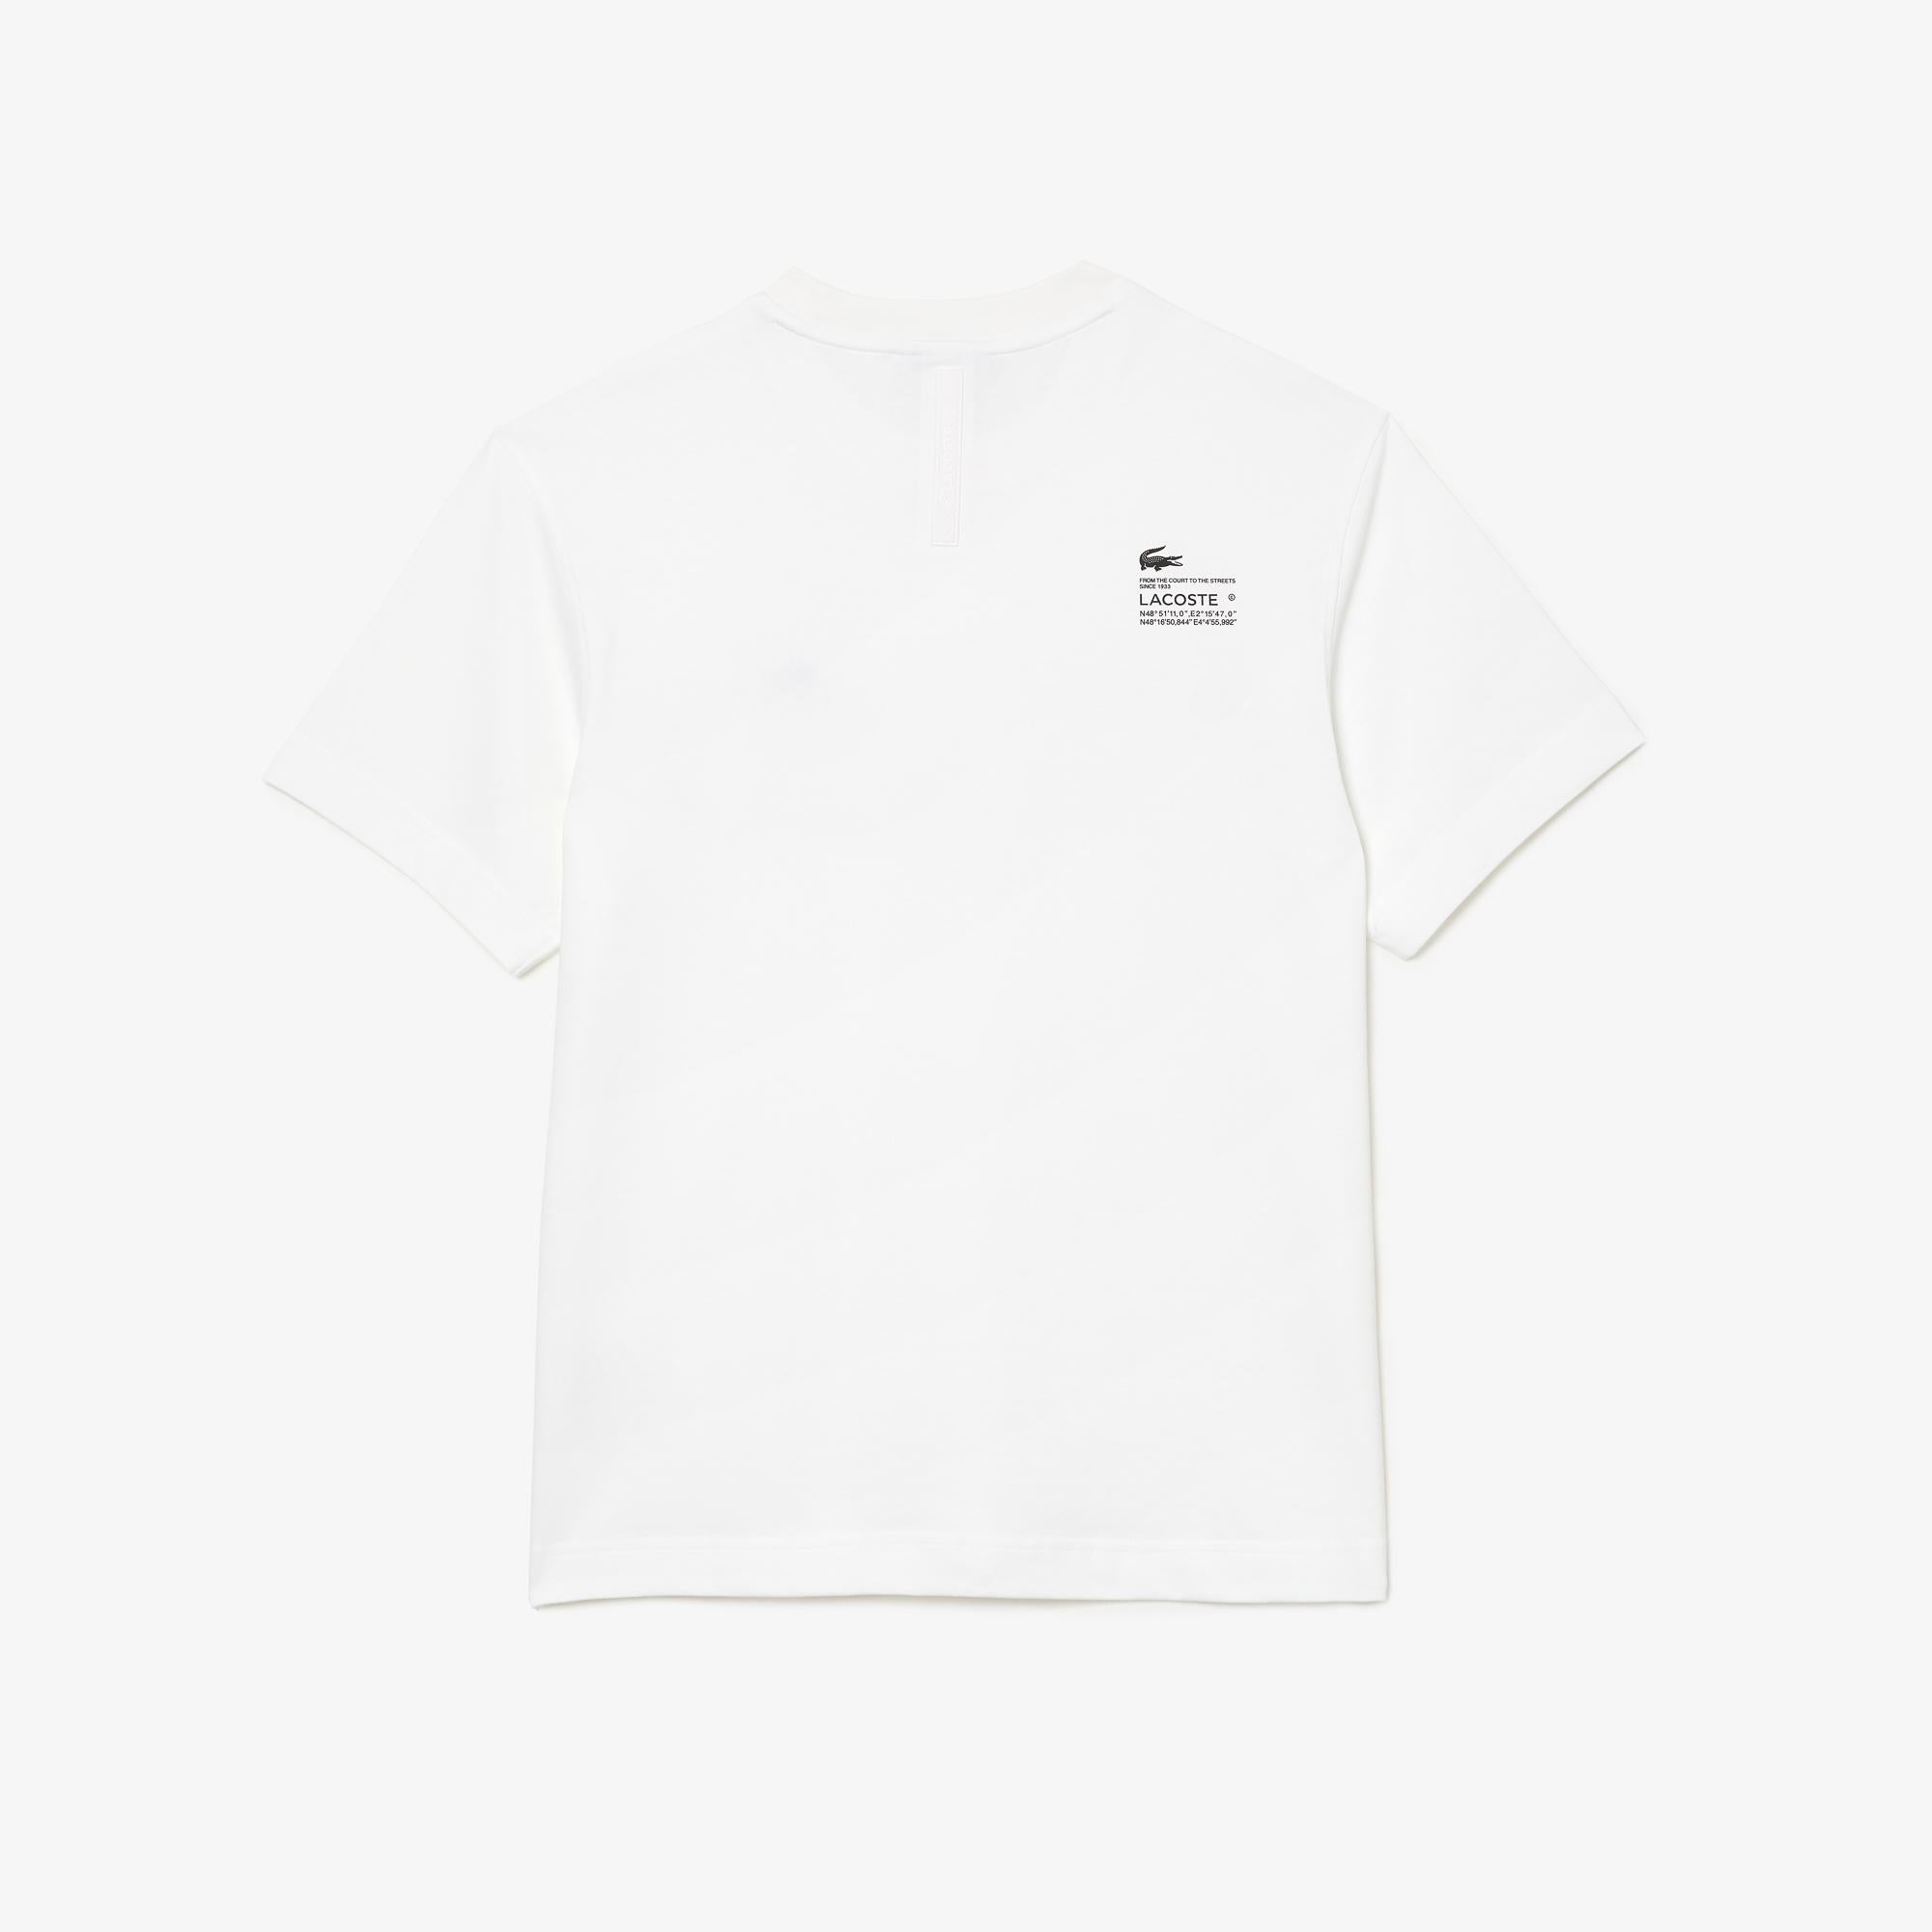 LCA-B15 (Lacoste active sailing t-shirt white) 22396087 LACOSTE